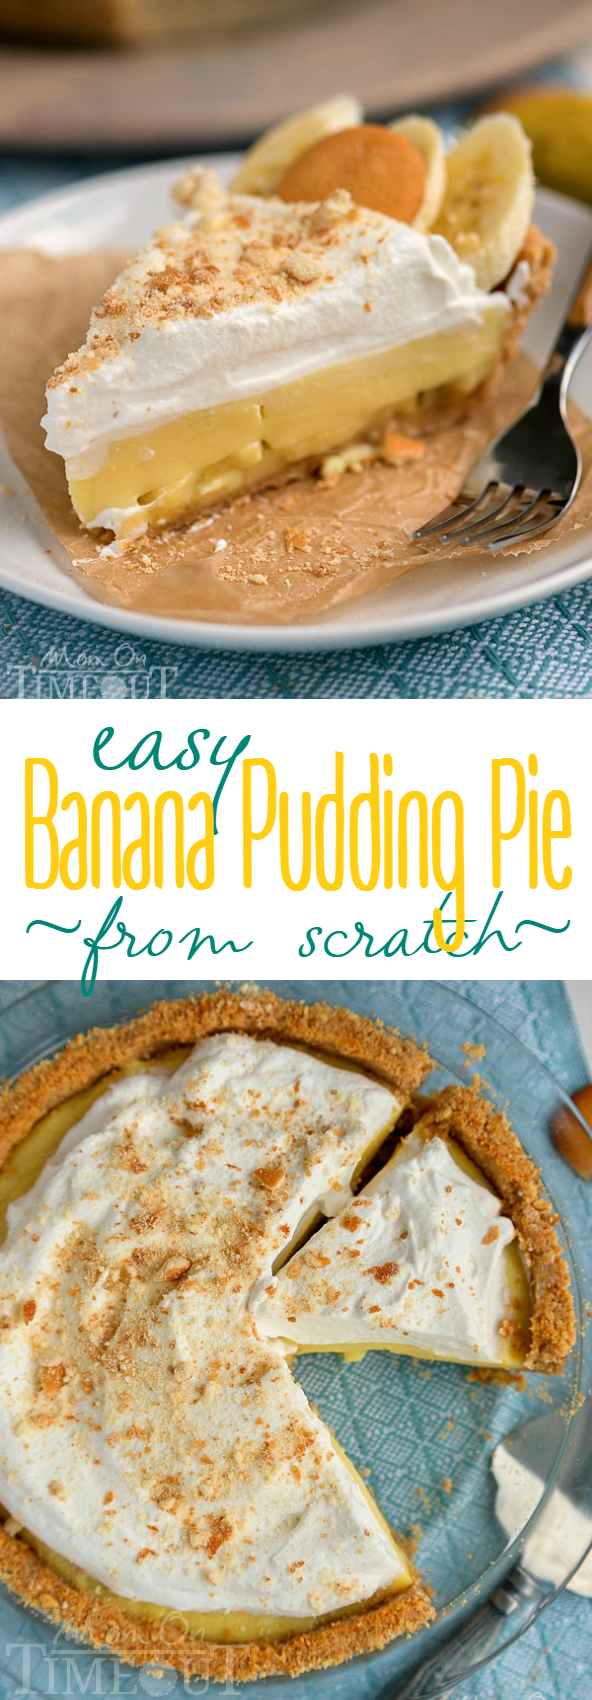 This Easy Banana Pudding Pie recipe is made totally from scratch! Perfect for picnics, potlucks, and all your gatherings all summer long! | MomOnTimeout.com